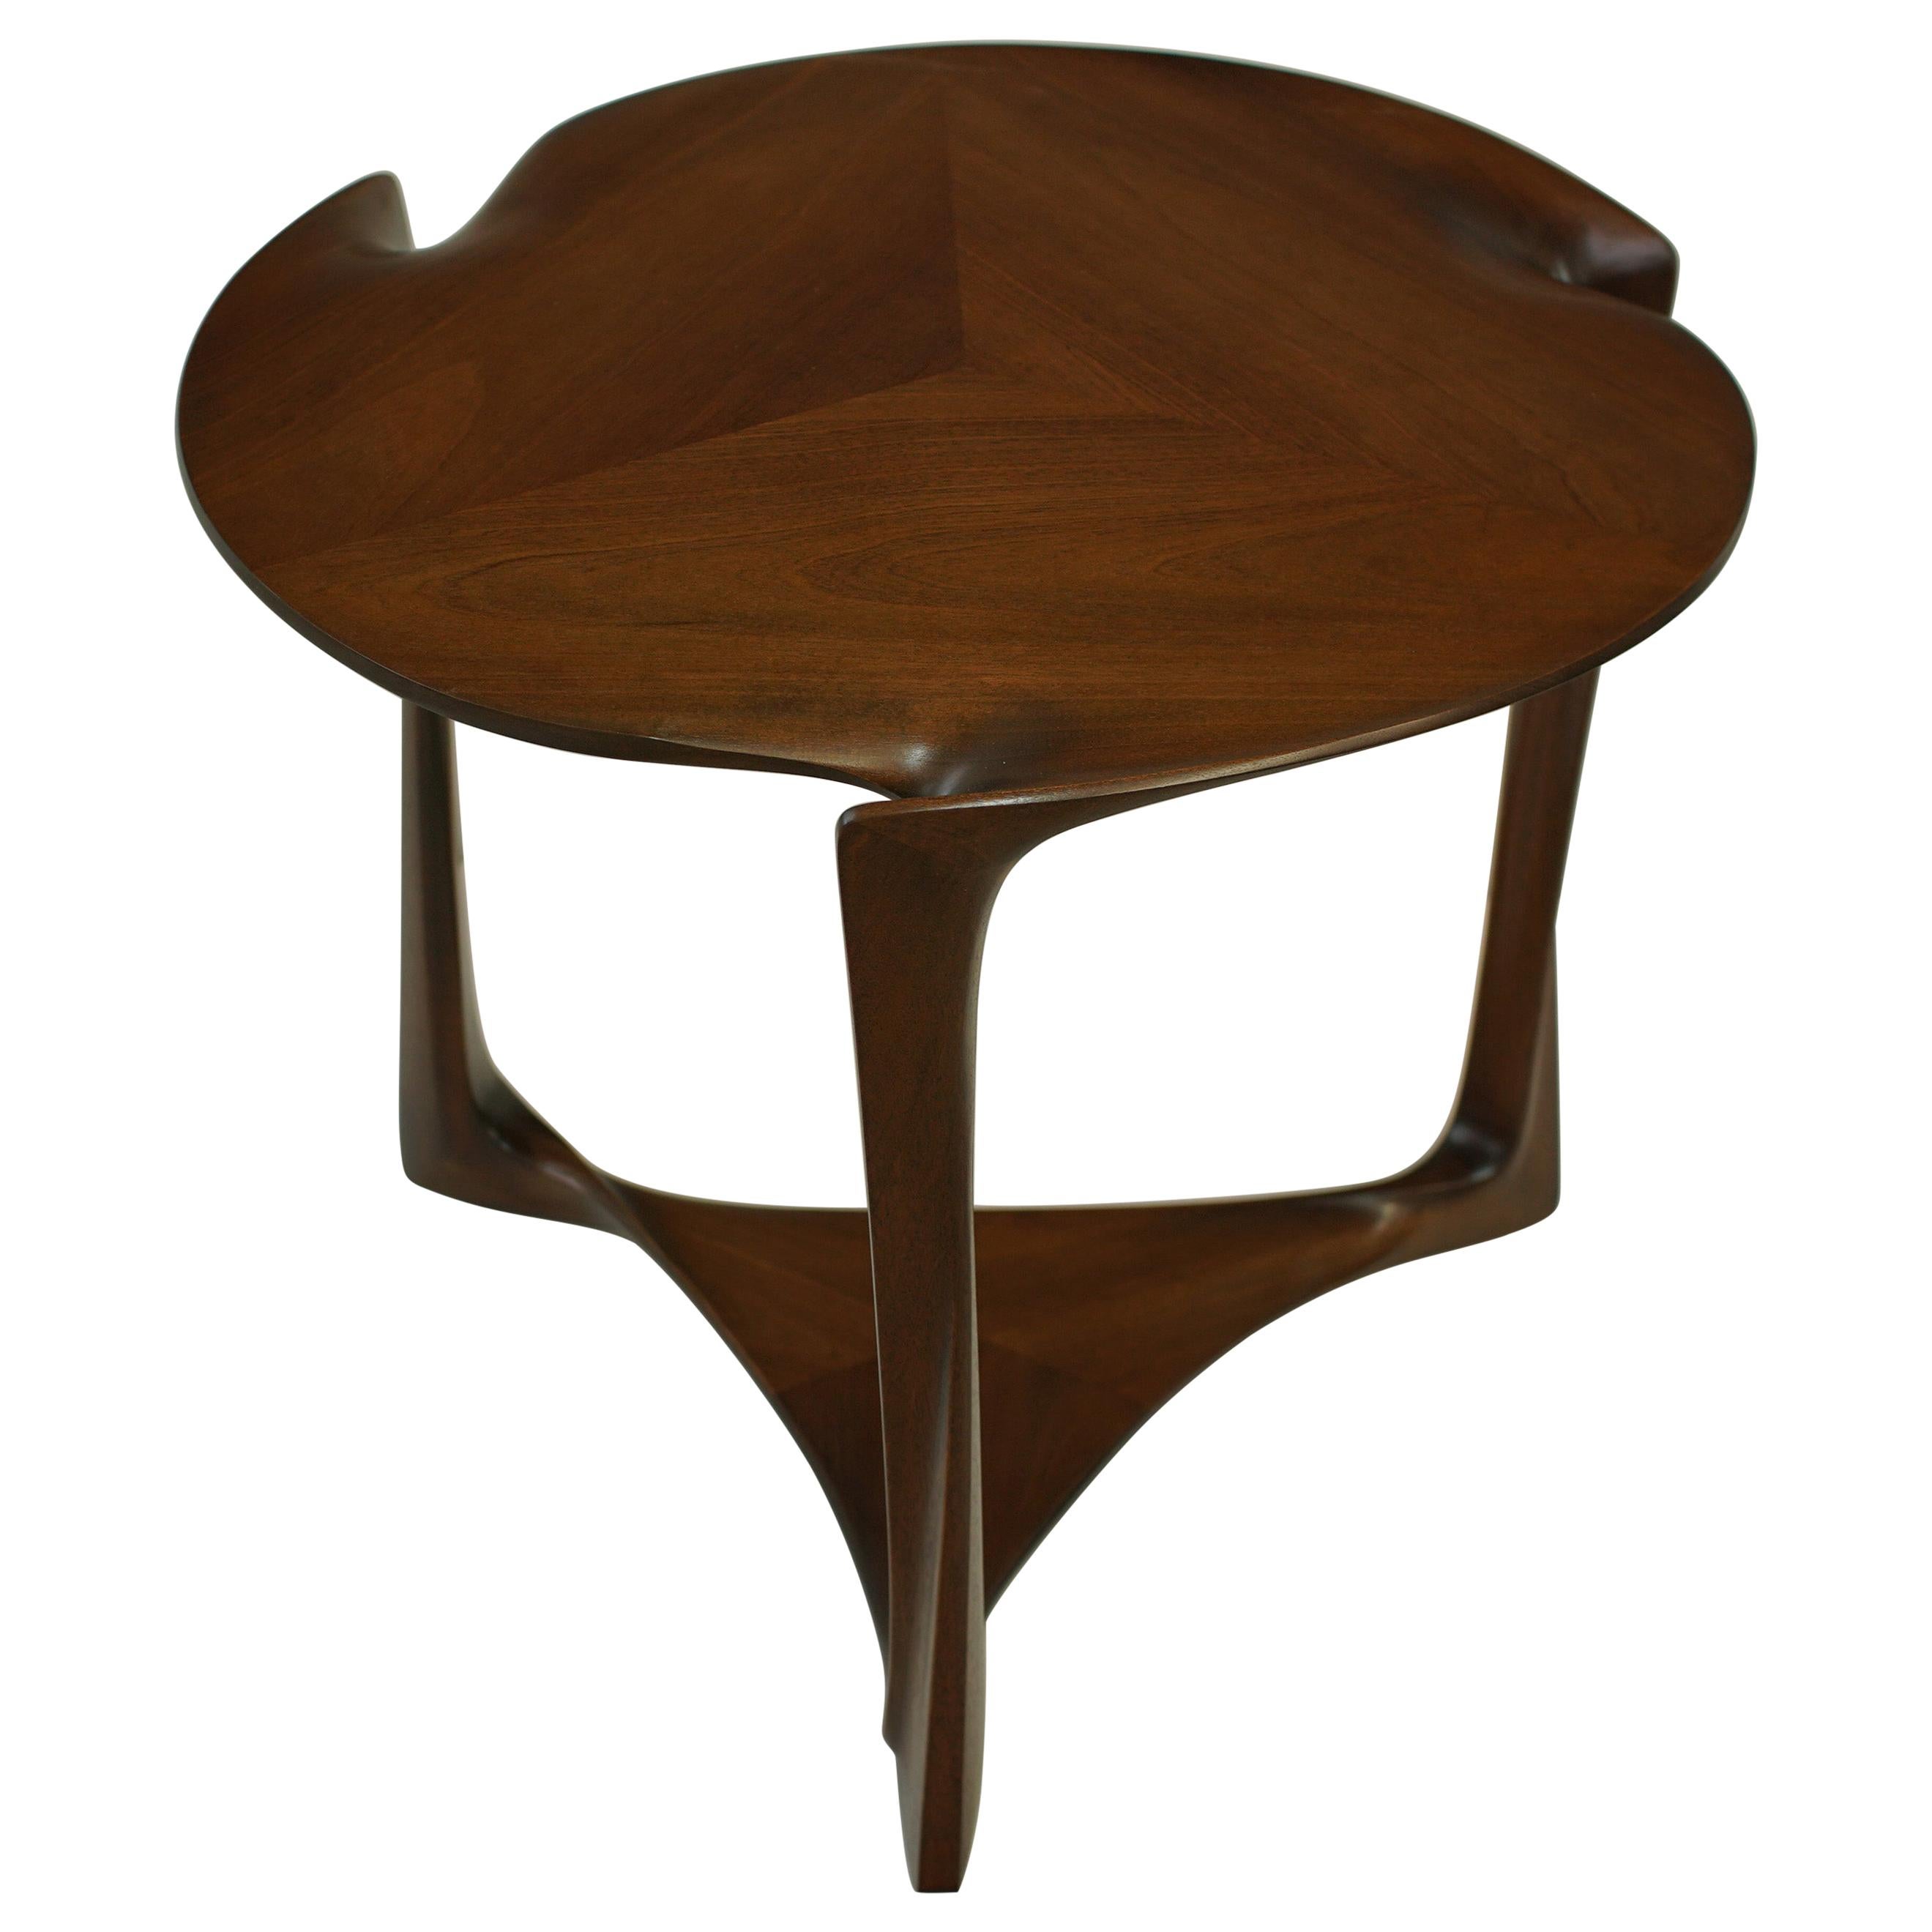 Gail-Sculpted, Contemporary, Carved, Sensuous Sapele 3-Legged Occasional Table